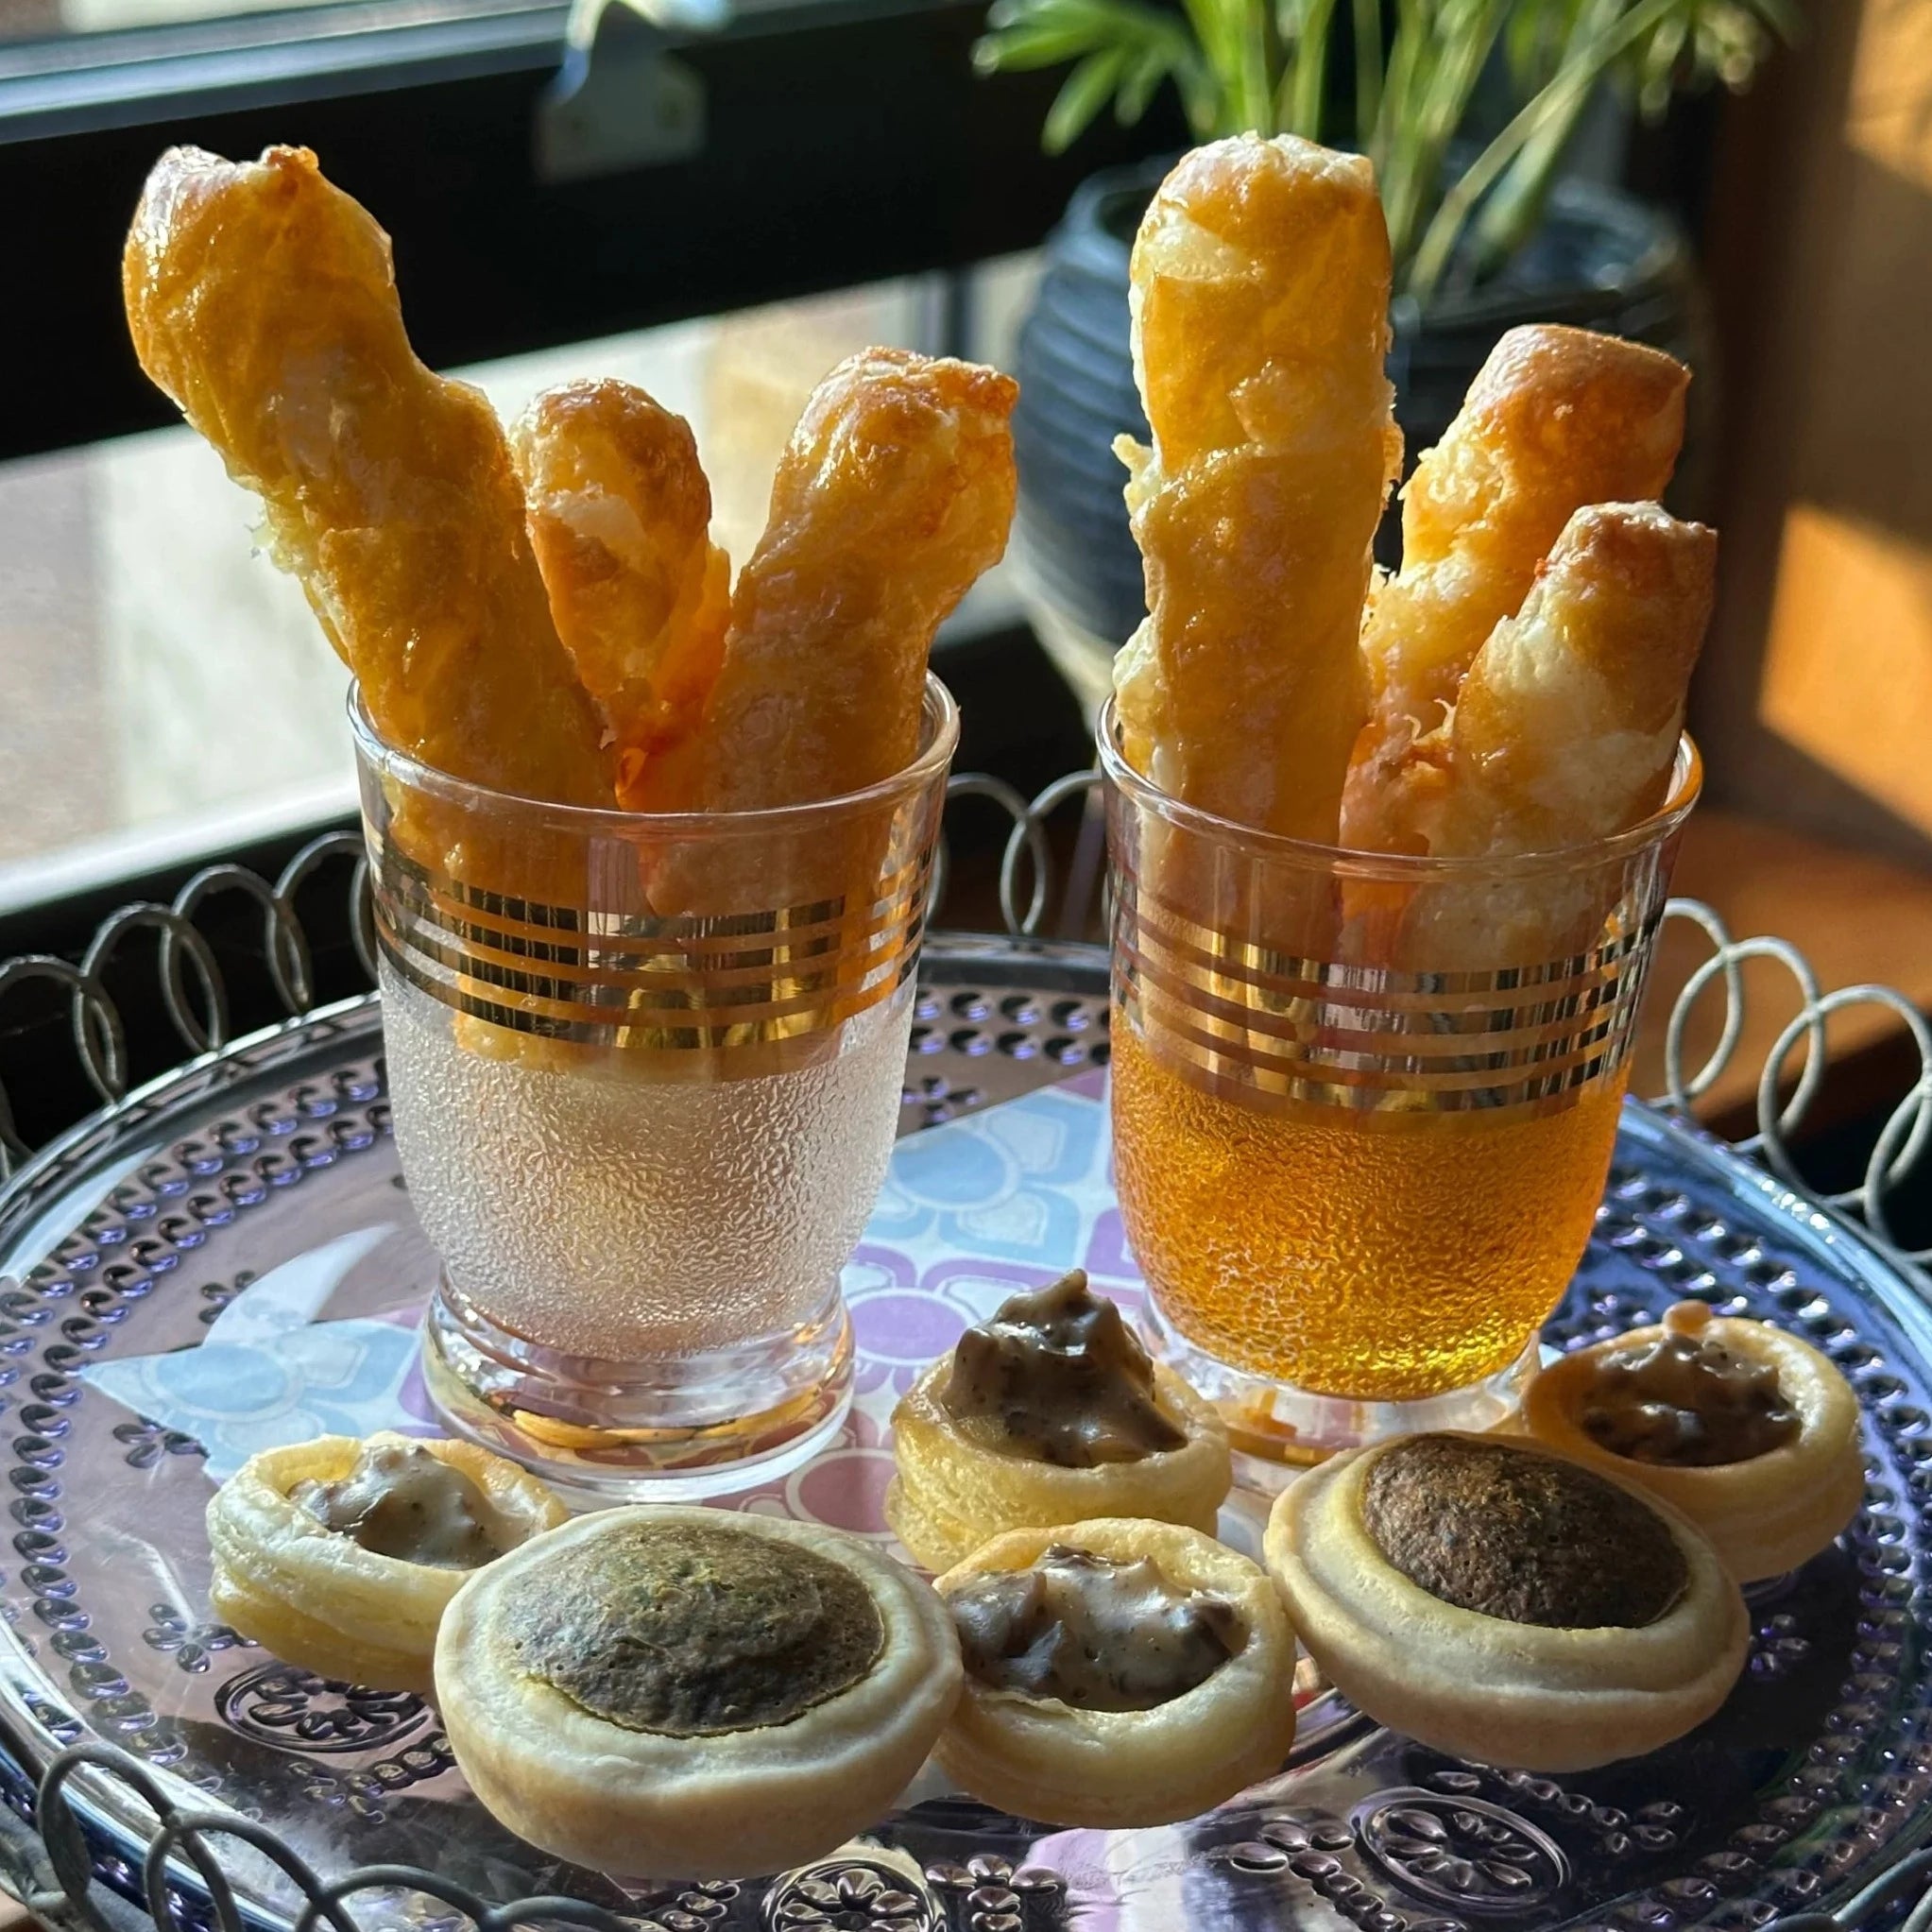 Savoury treats of the Afternoon Tea on a tray